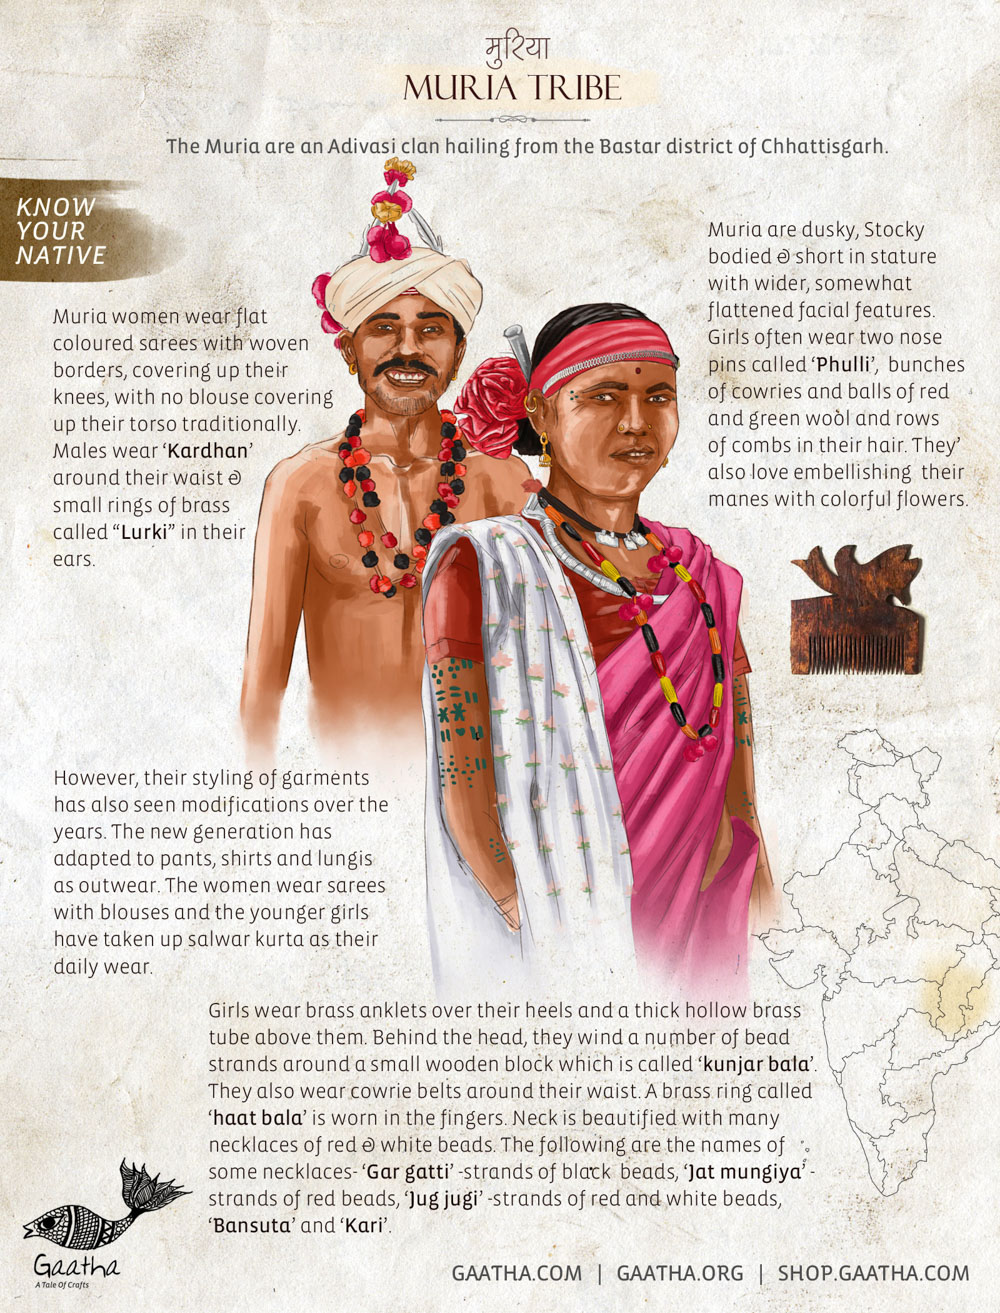 The Murias are an Adivasi clan hailing from the Bastar district of Chhattisgarh.